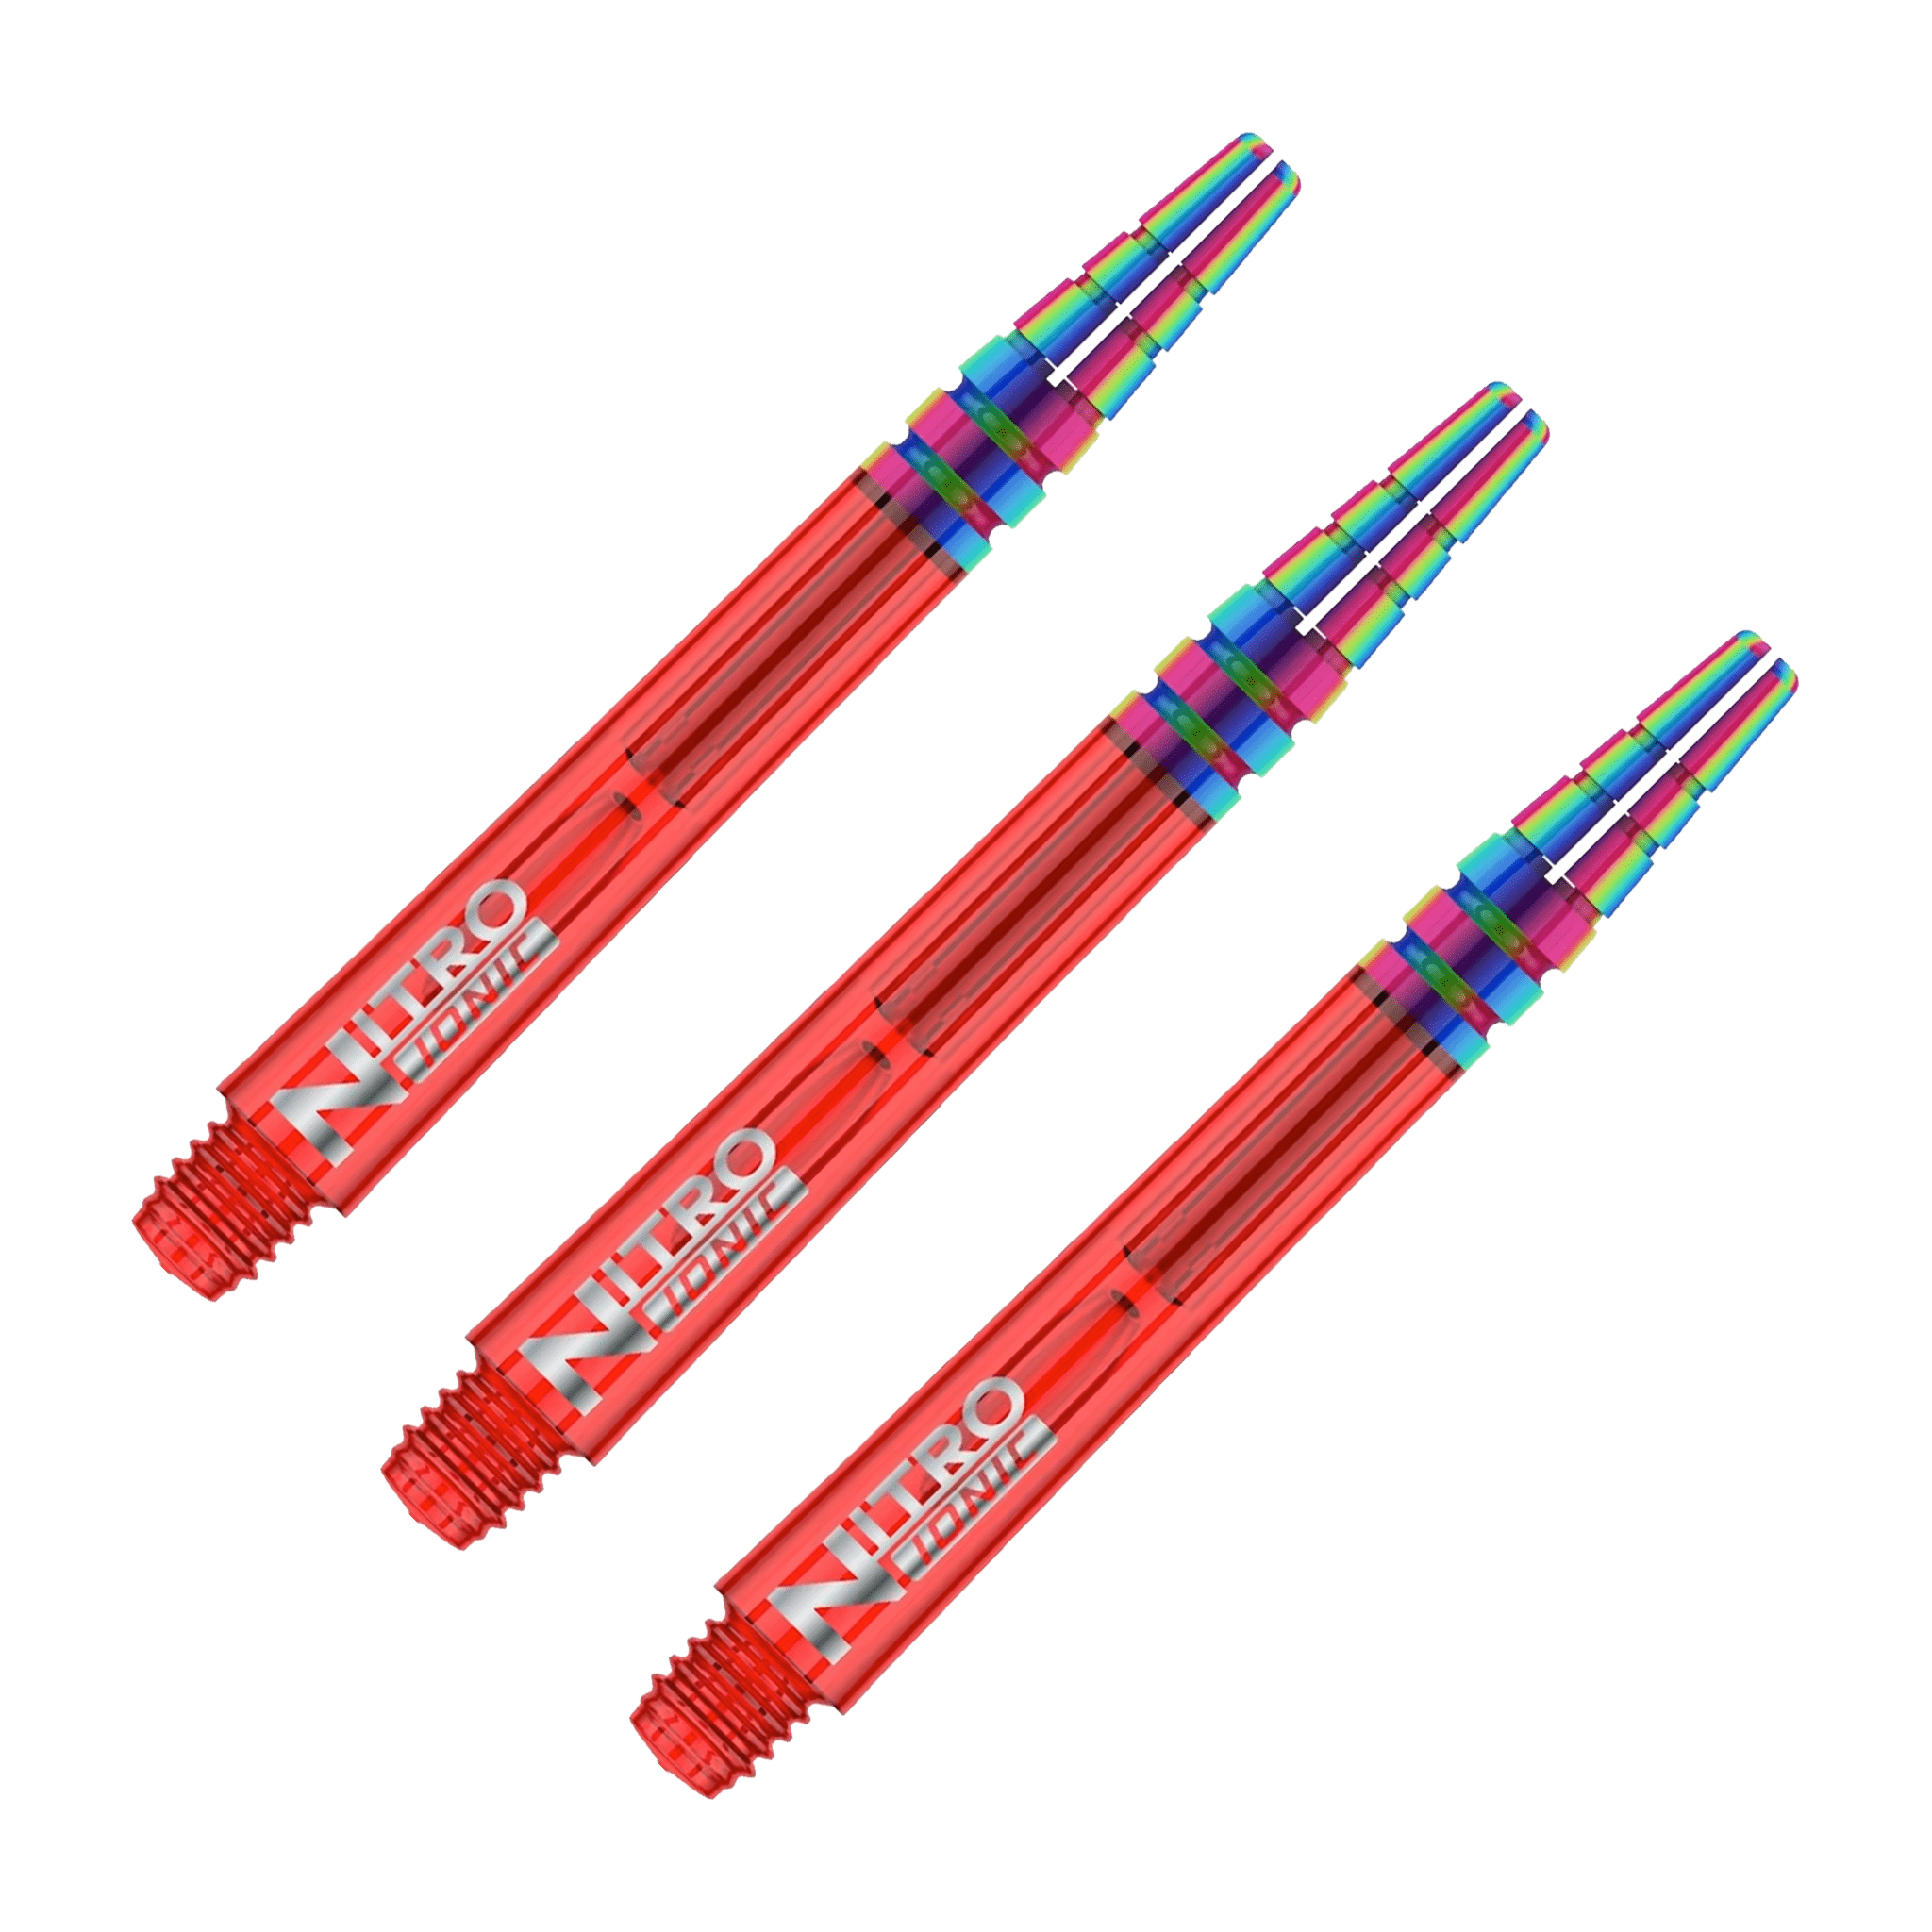 Red Dragon Nitrotech Ionic - Polycarbonate Dart Shafts Intermediate (39mm) / Red Shafts